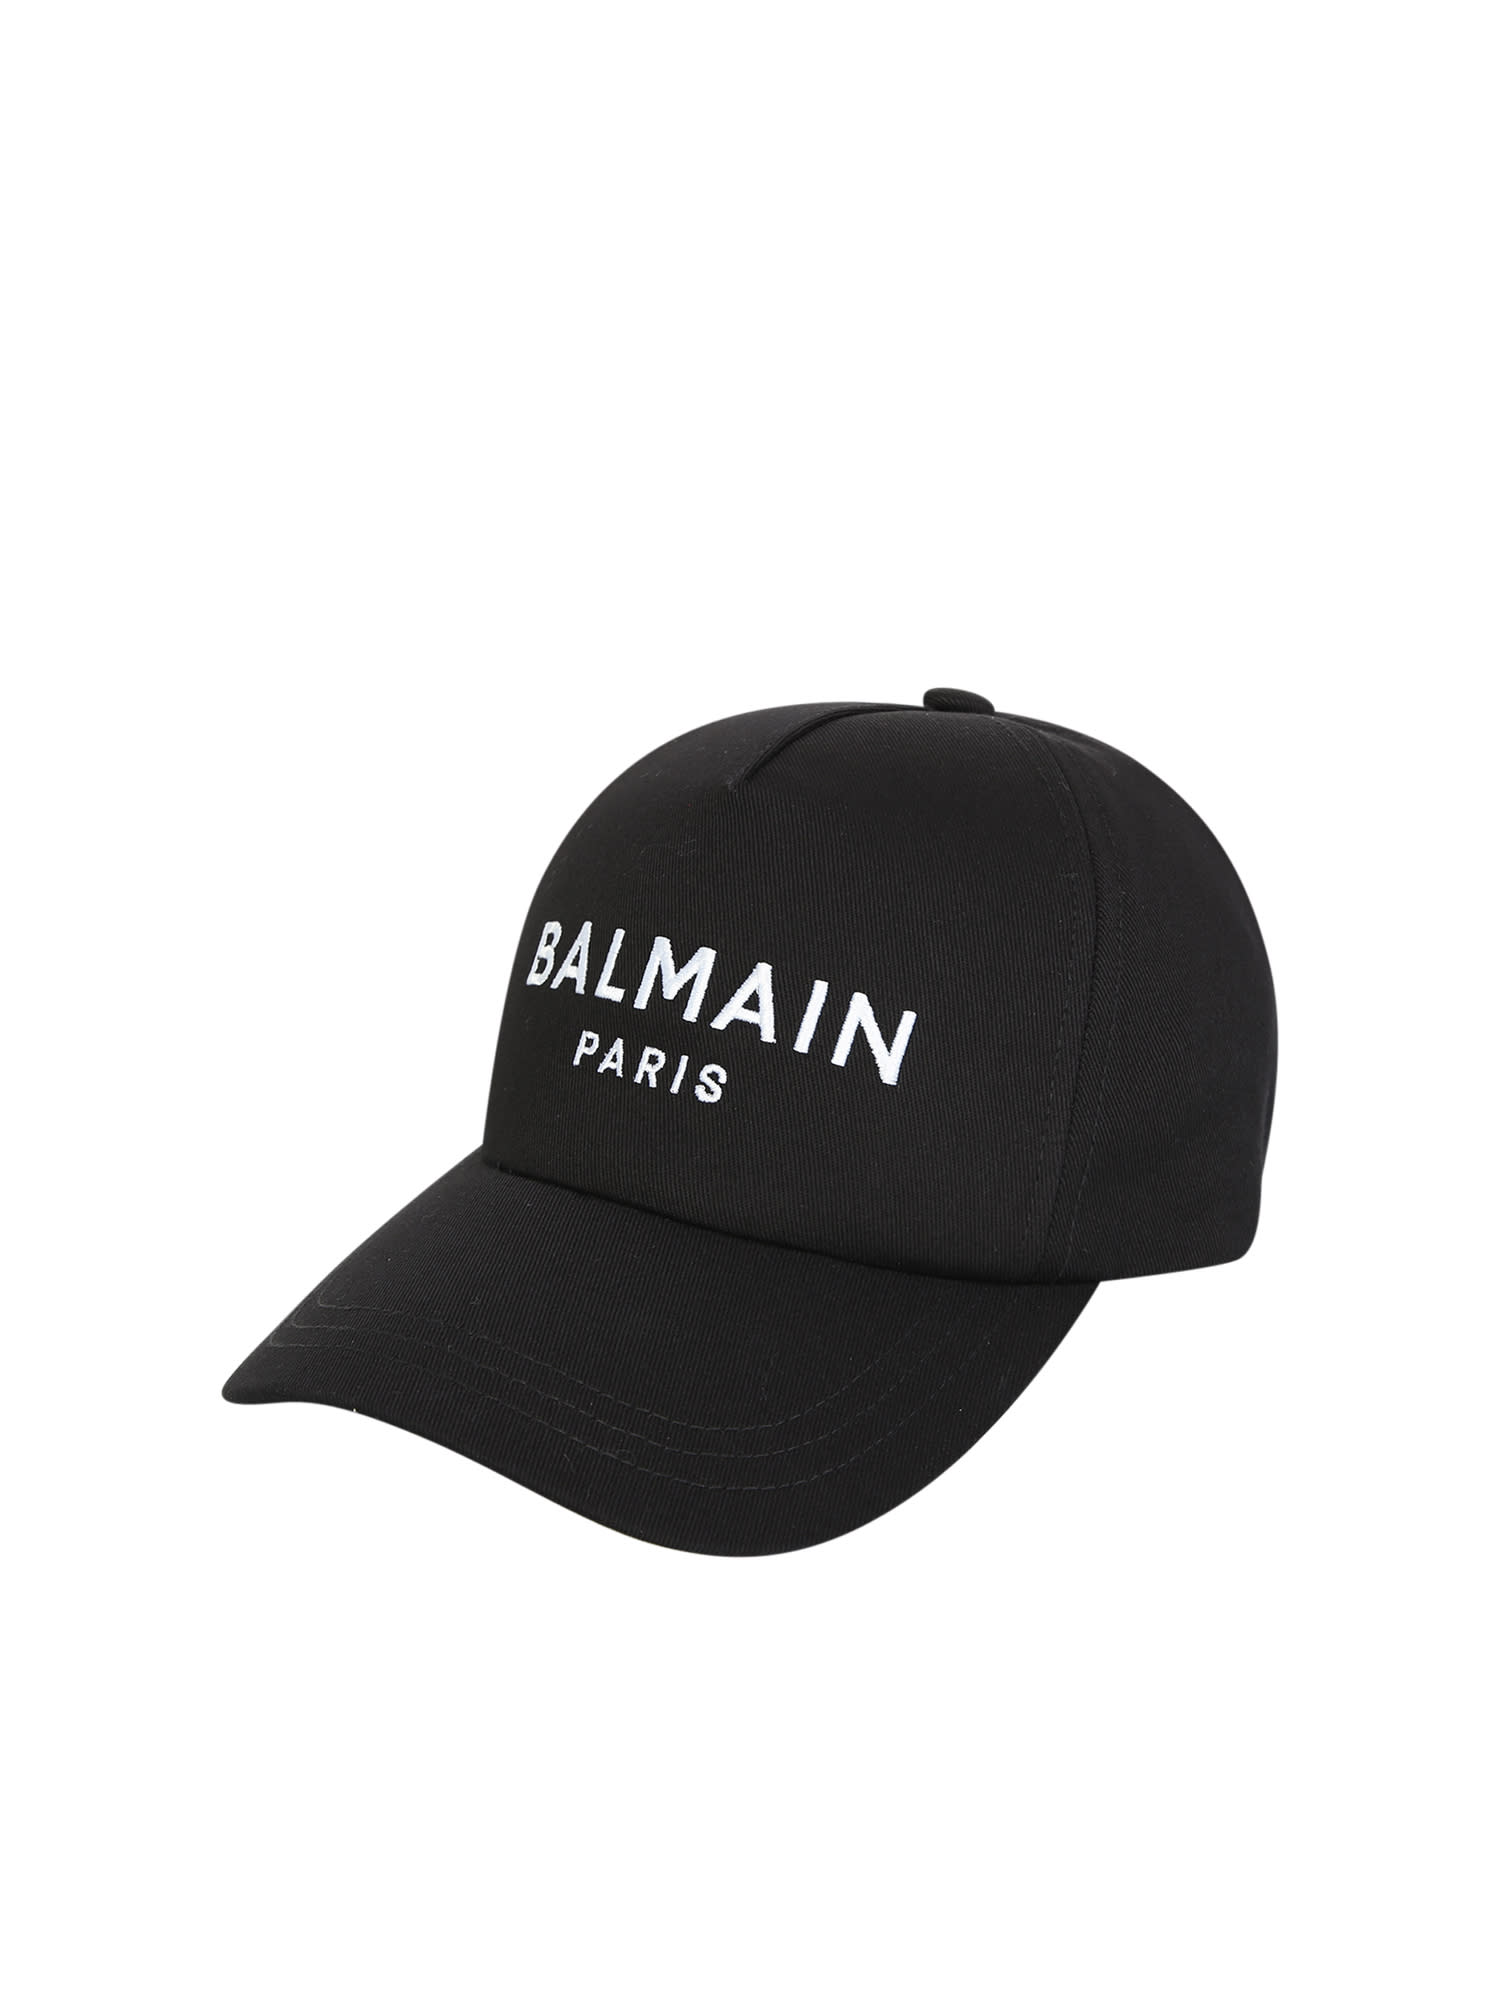 Hat With Balmain Logo; Essential Accessory For The Most Authentic And Sporty Looks